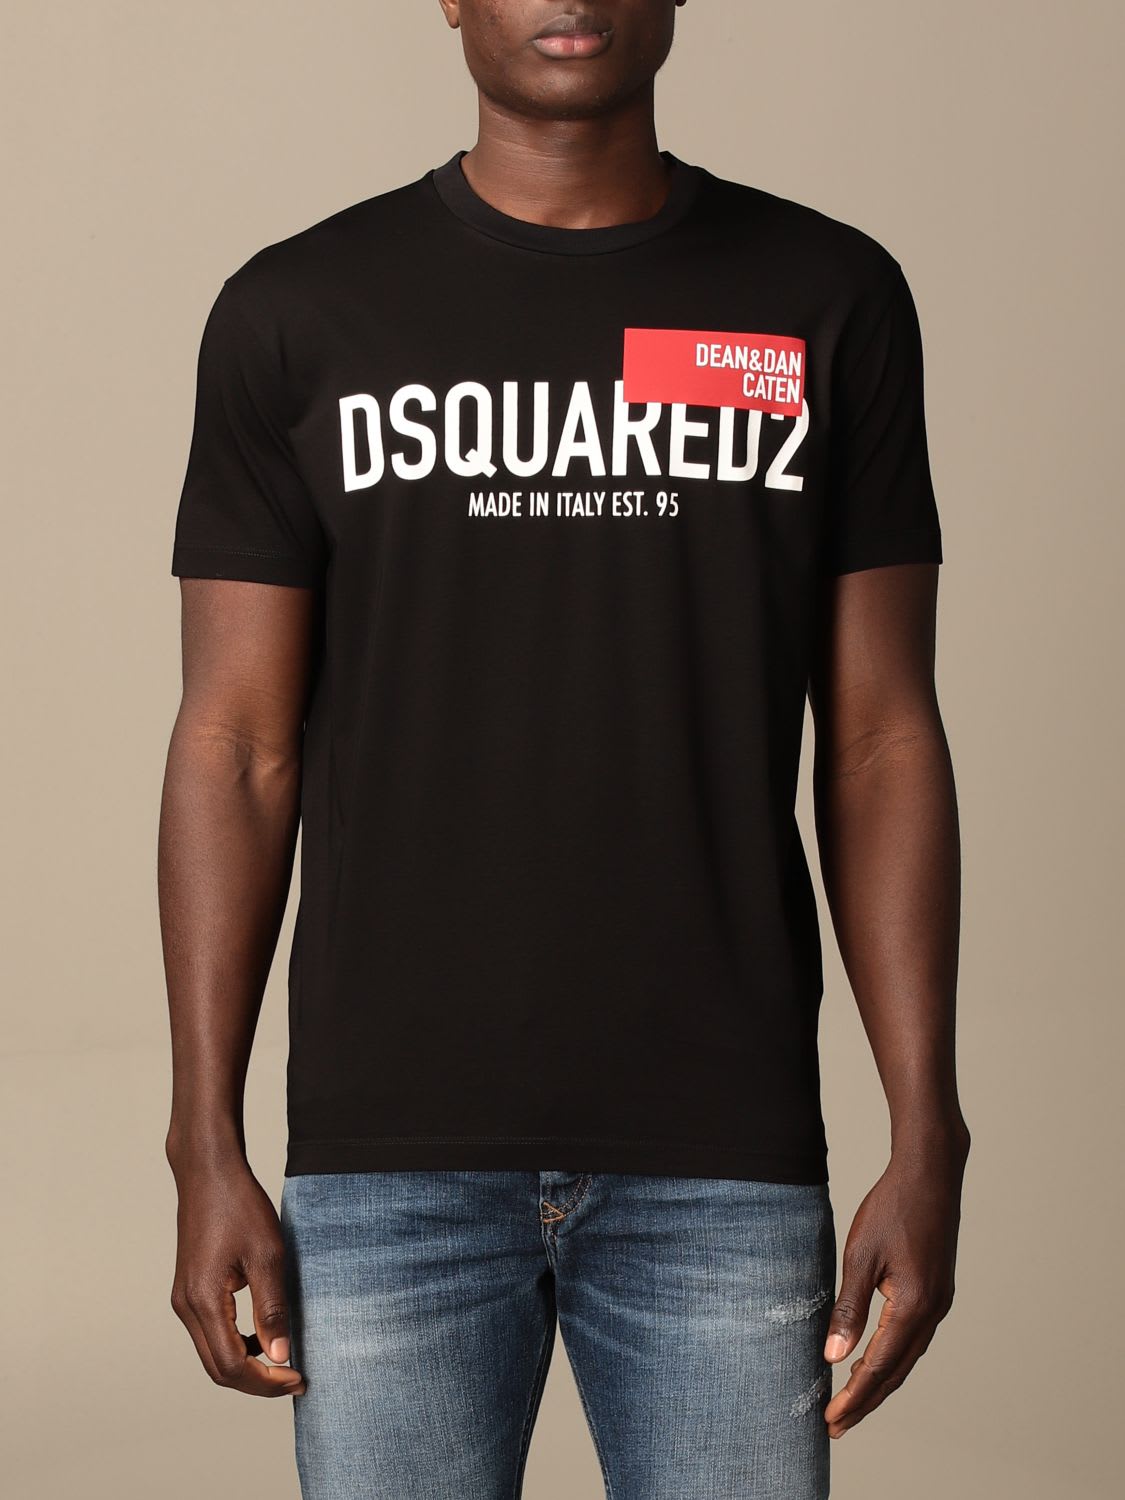 DSQUARED2 COTTON T-SHIRT WITH LOGO,S71GD1021 S23009 900